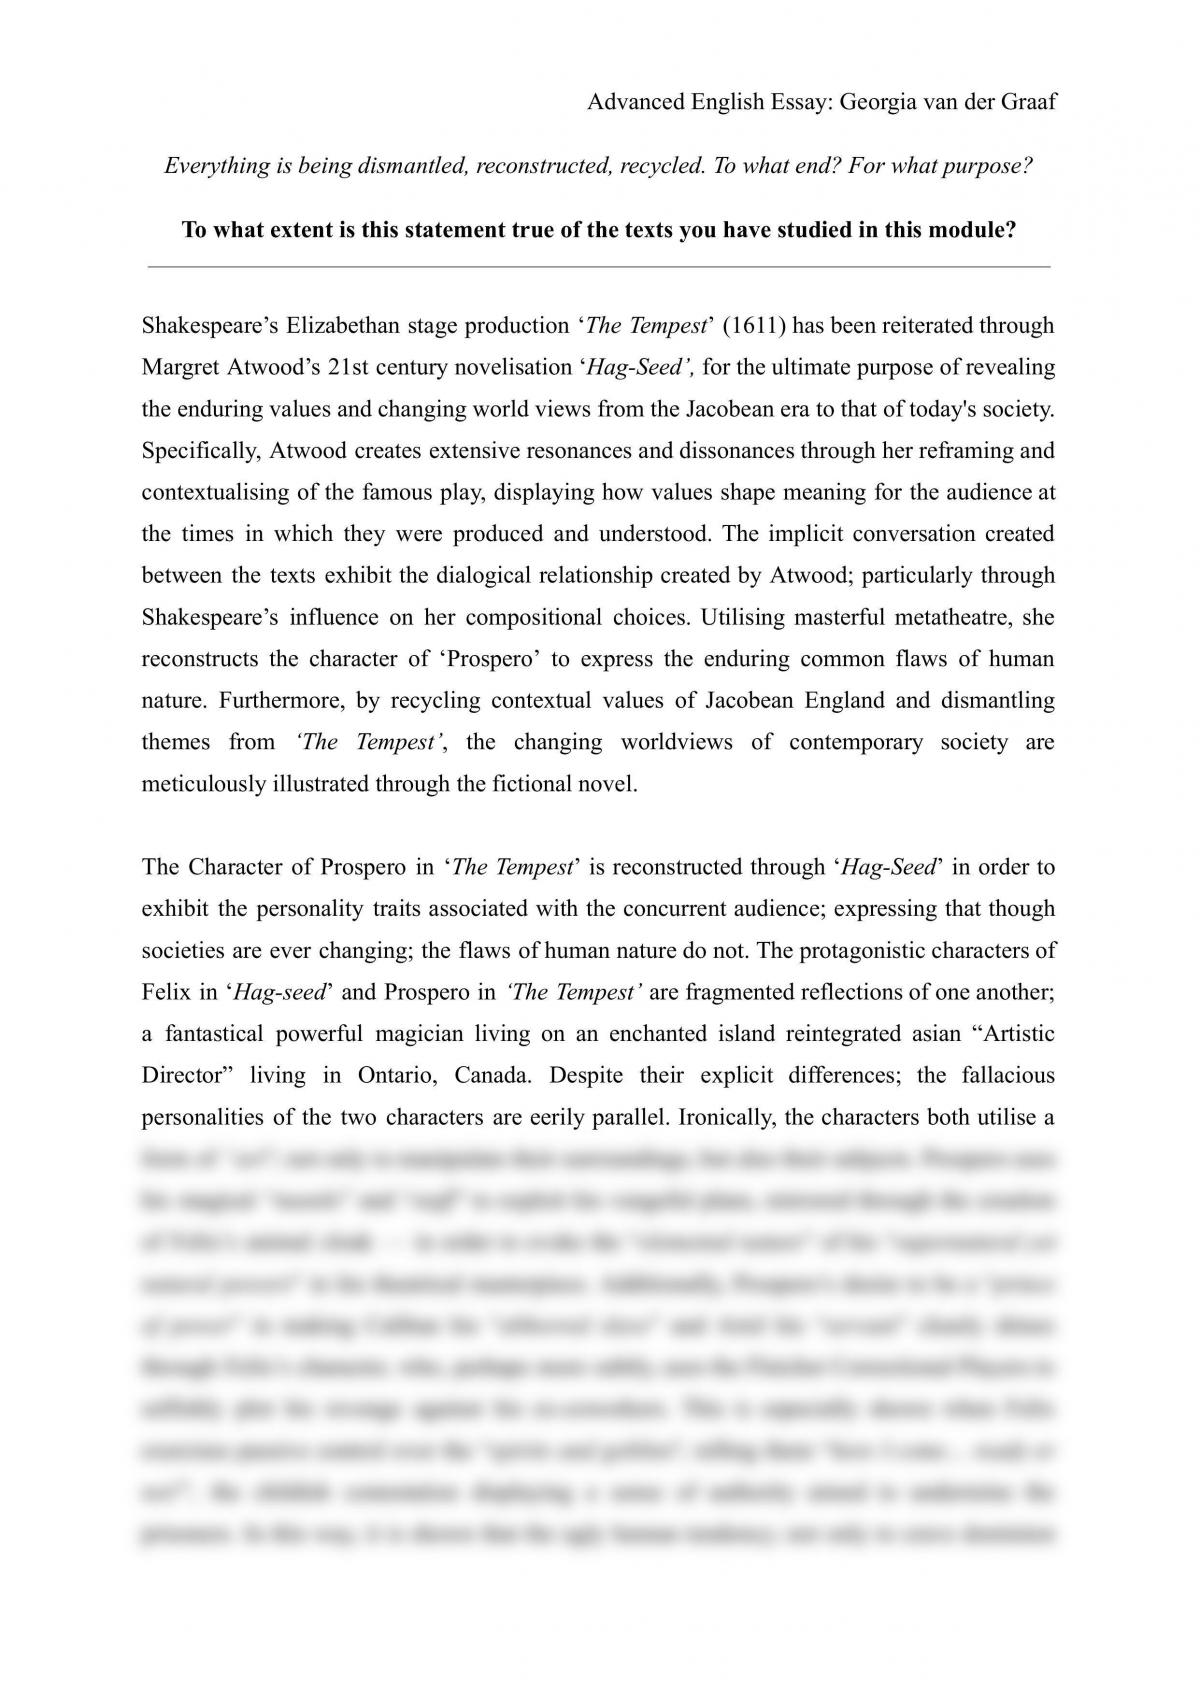 the tempest and hagseed essay